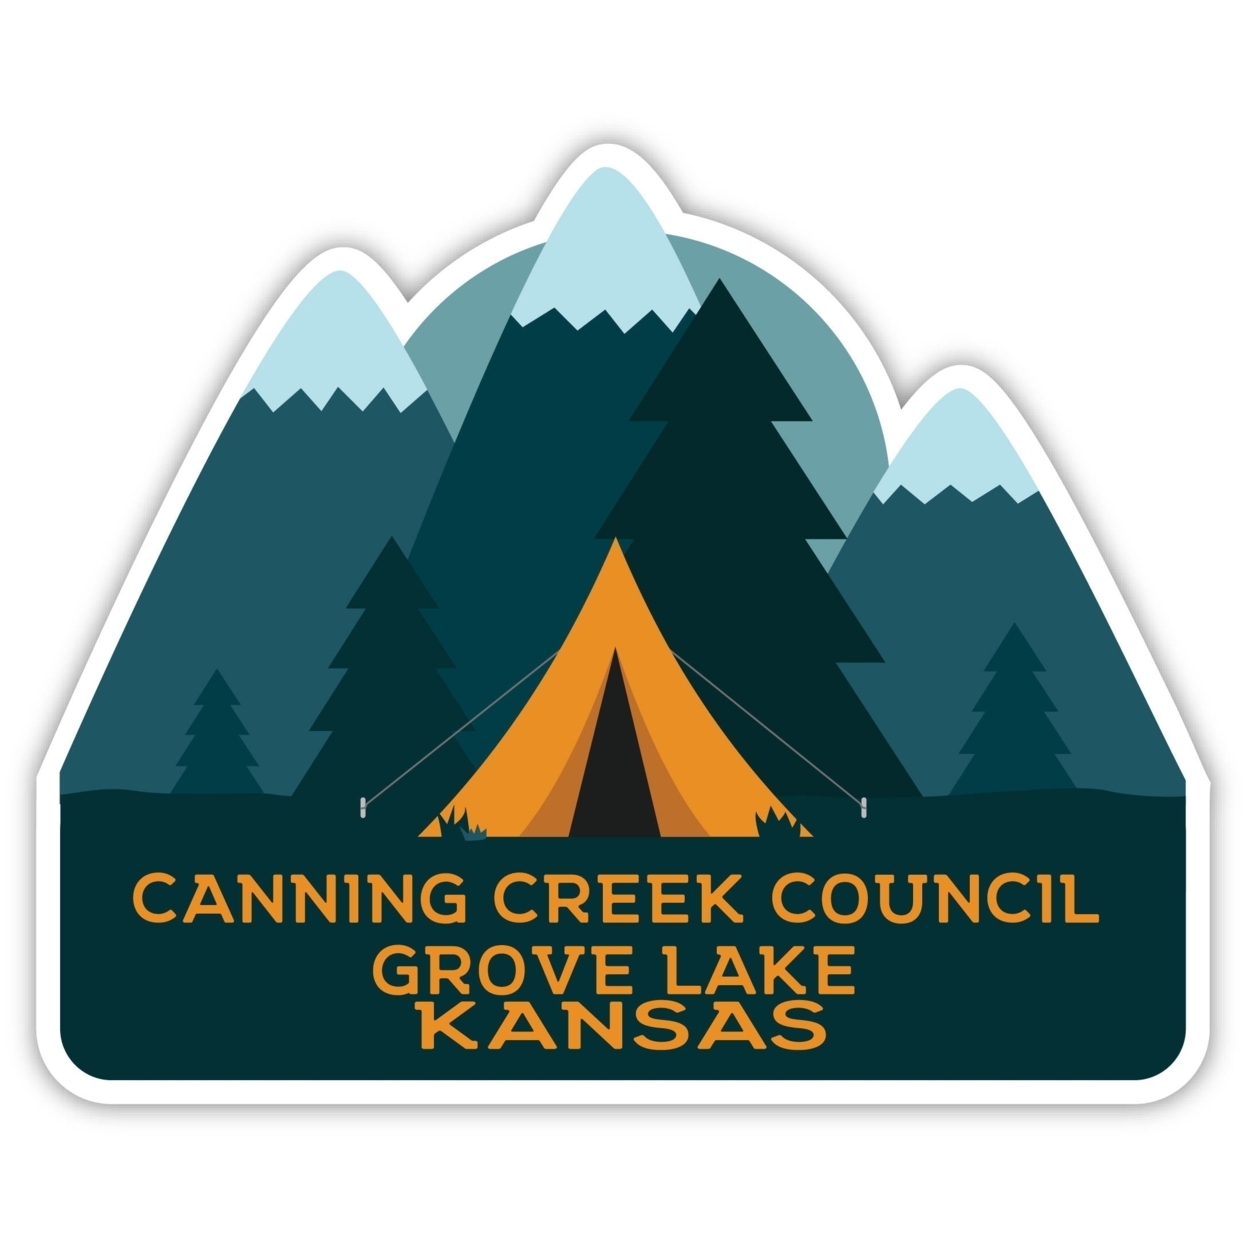 Canning Creek Council Grove Lake Kansas Souvenir Decorative Stickers (Choose Theme And Size) - 4-Pack, 2-Inch, Tent